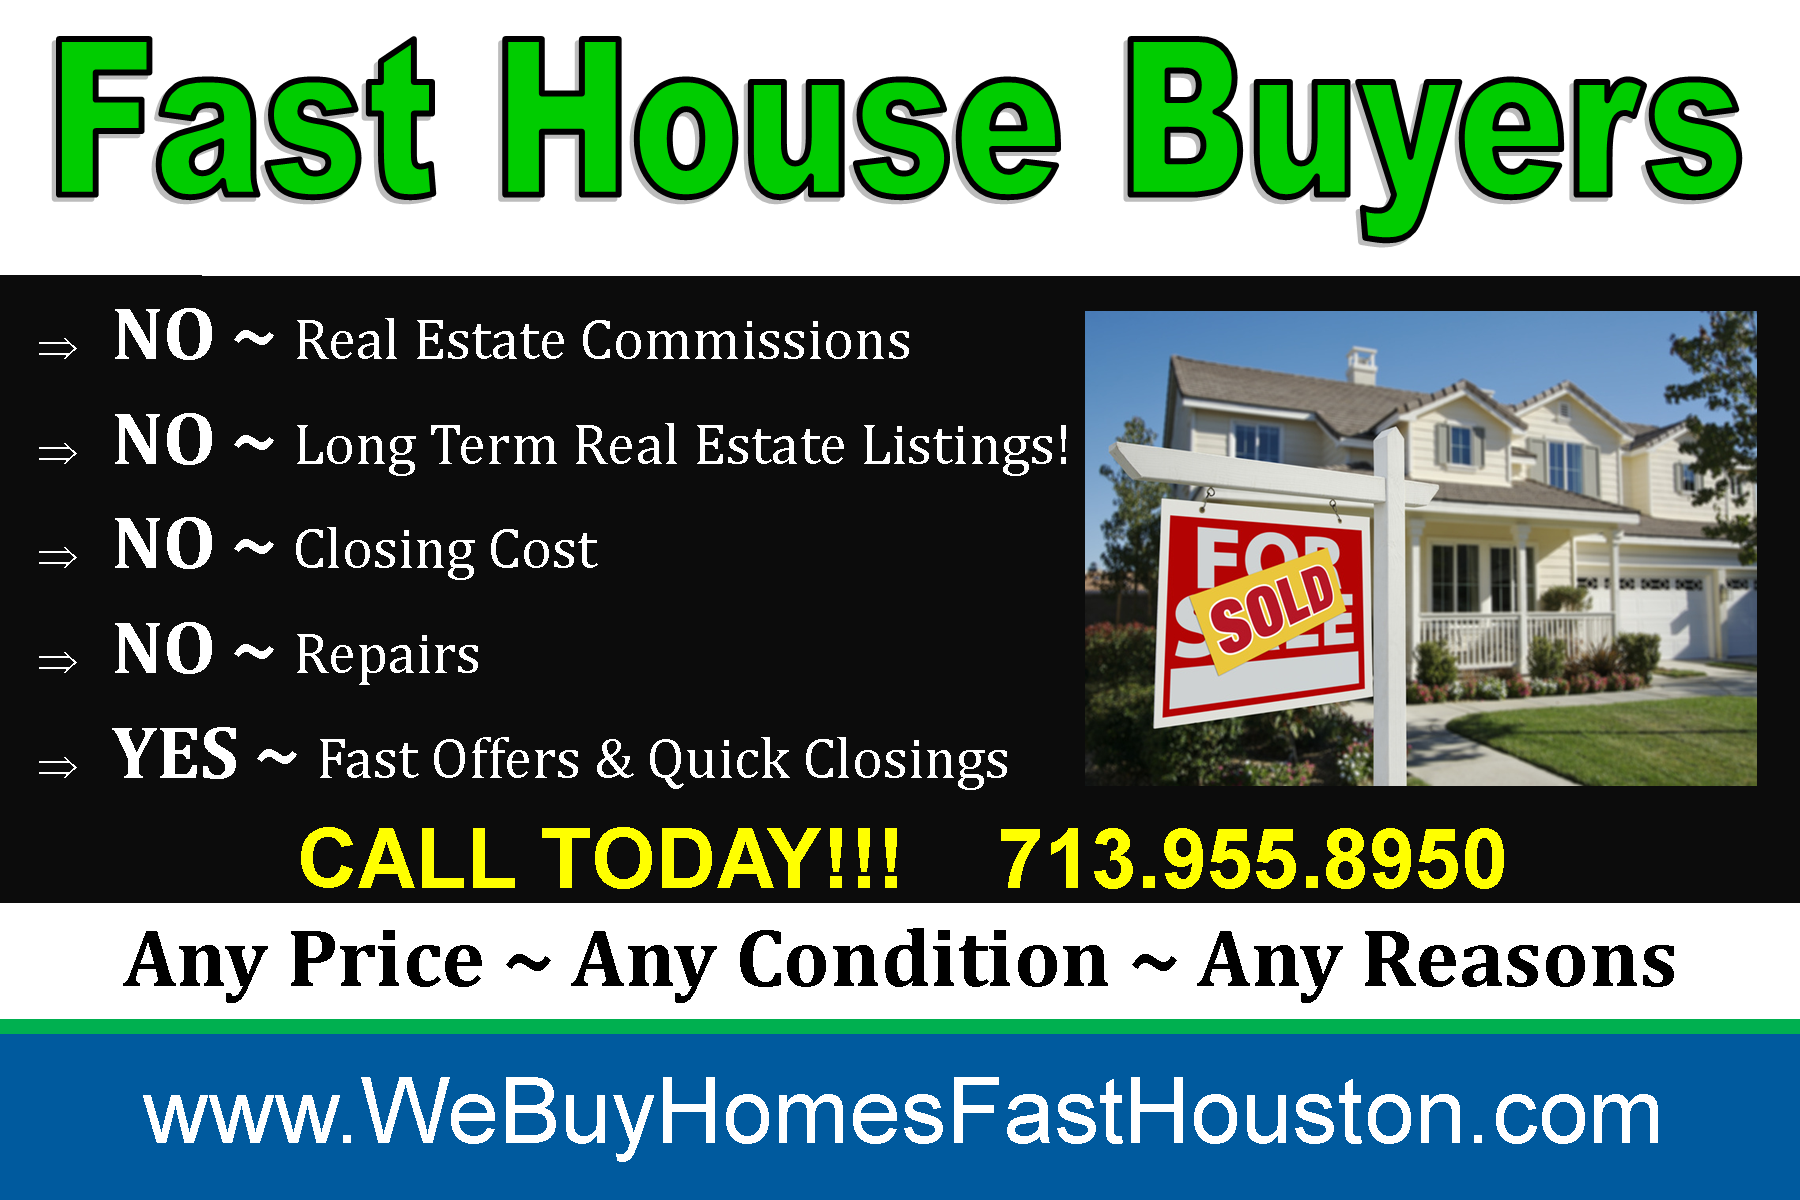 Fast House Buyers